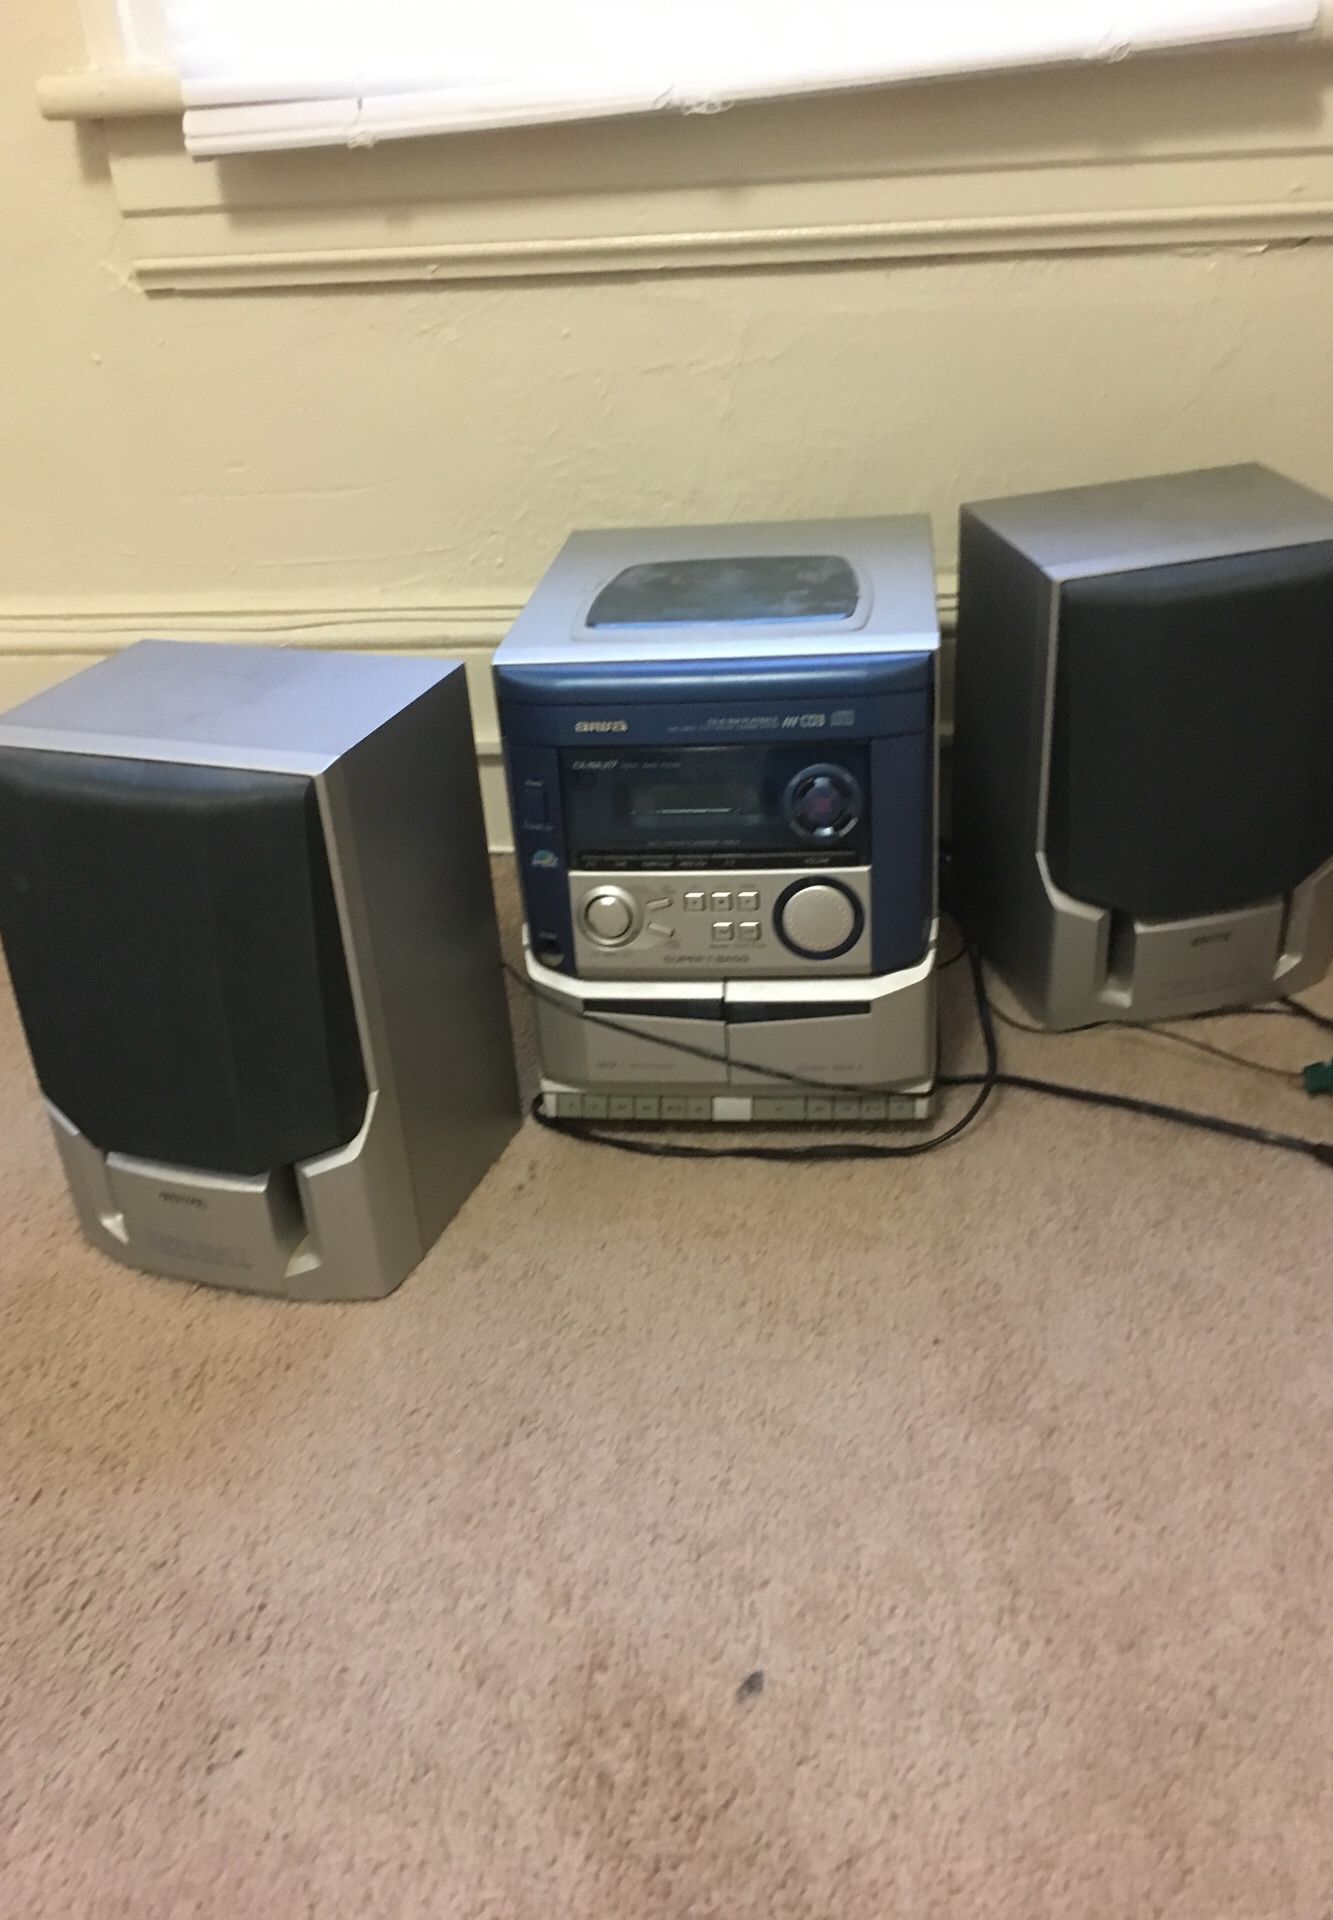 Awa CD-R/RW playback stereo with speakers